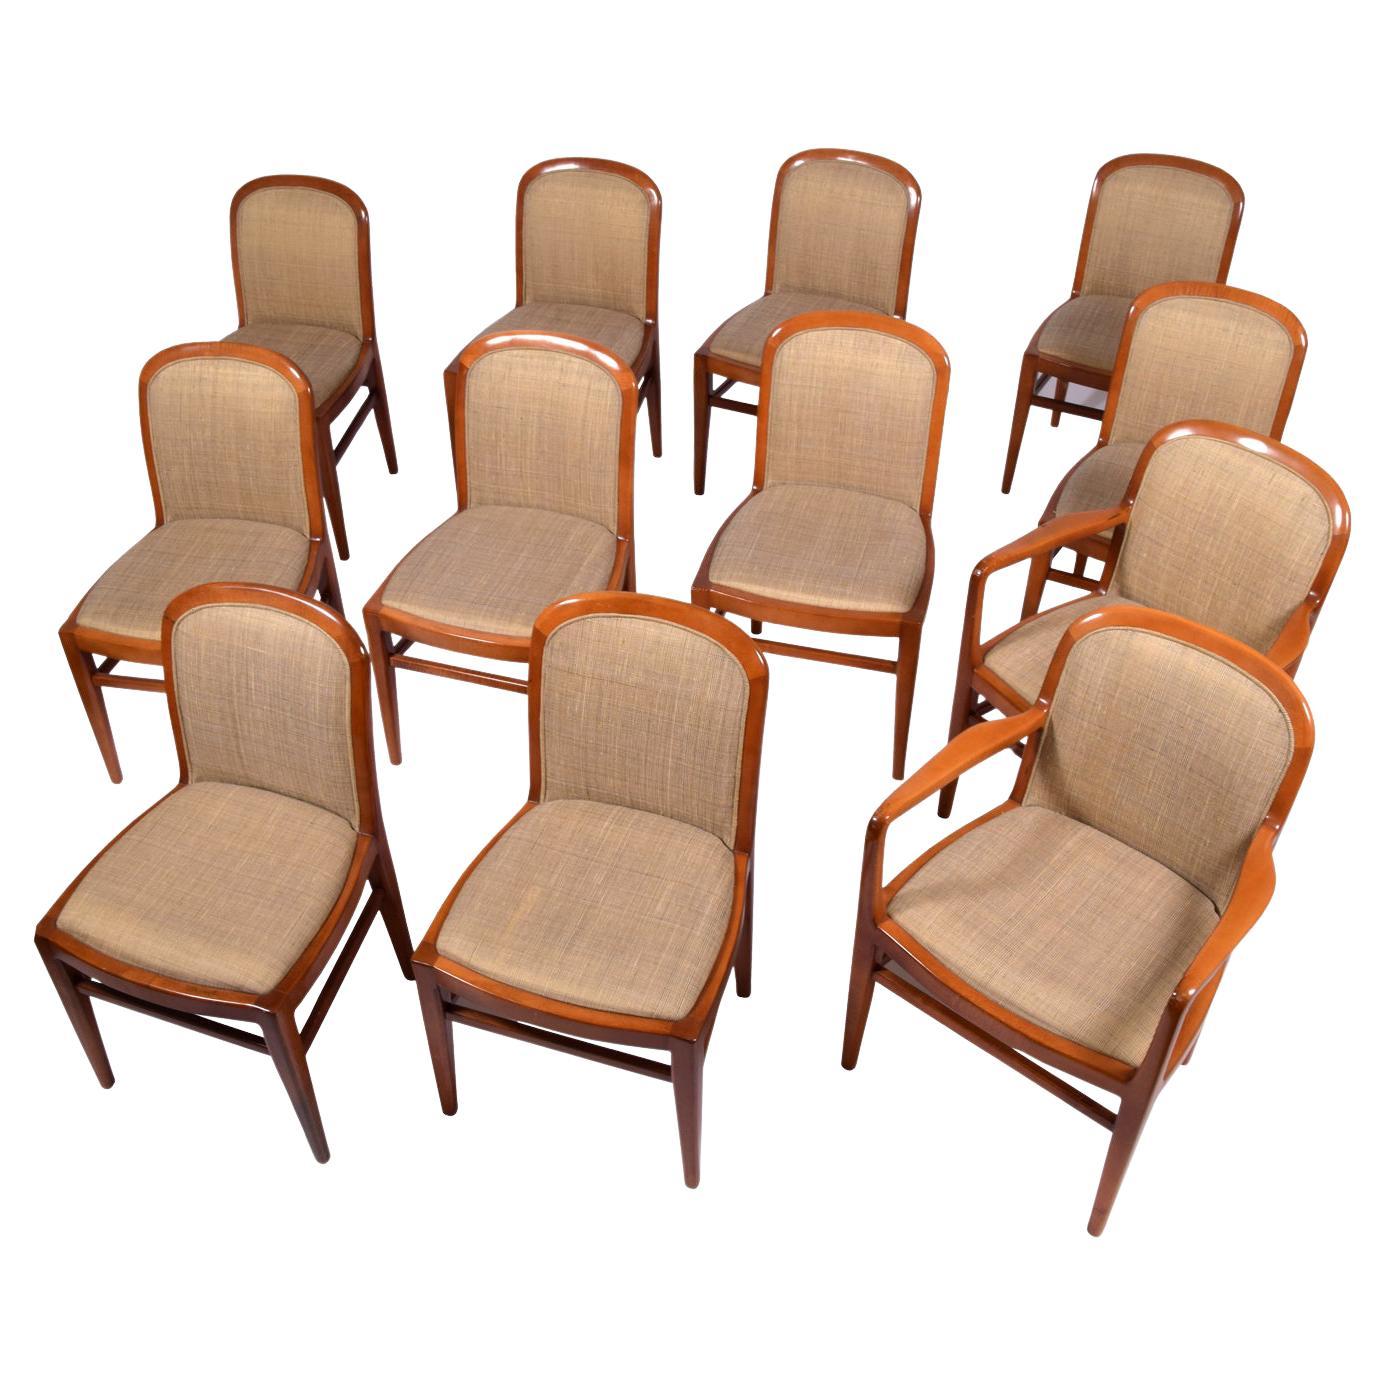 Jack Lenor Larsen 6 sides 2 arm Chairs For Sale